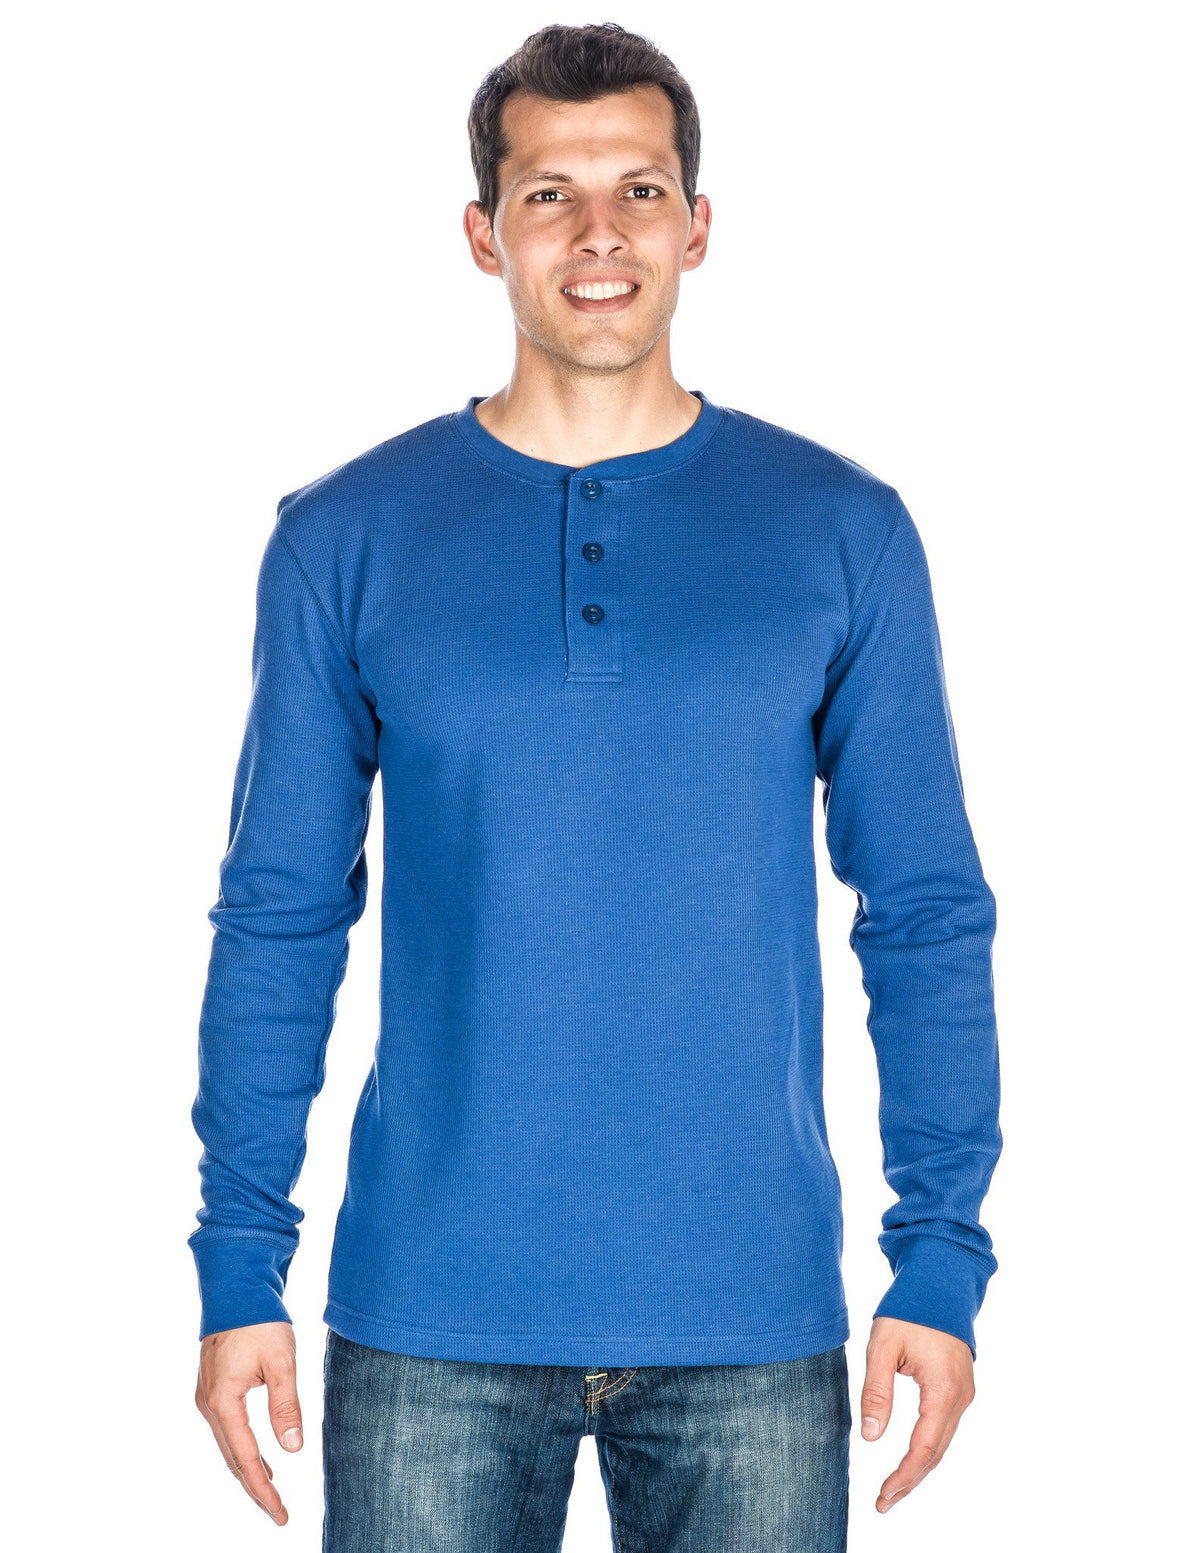 Men's Solid Thermal Henley Long Sleeve T-shirts - Navy Blue